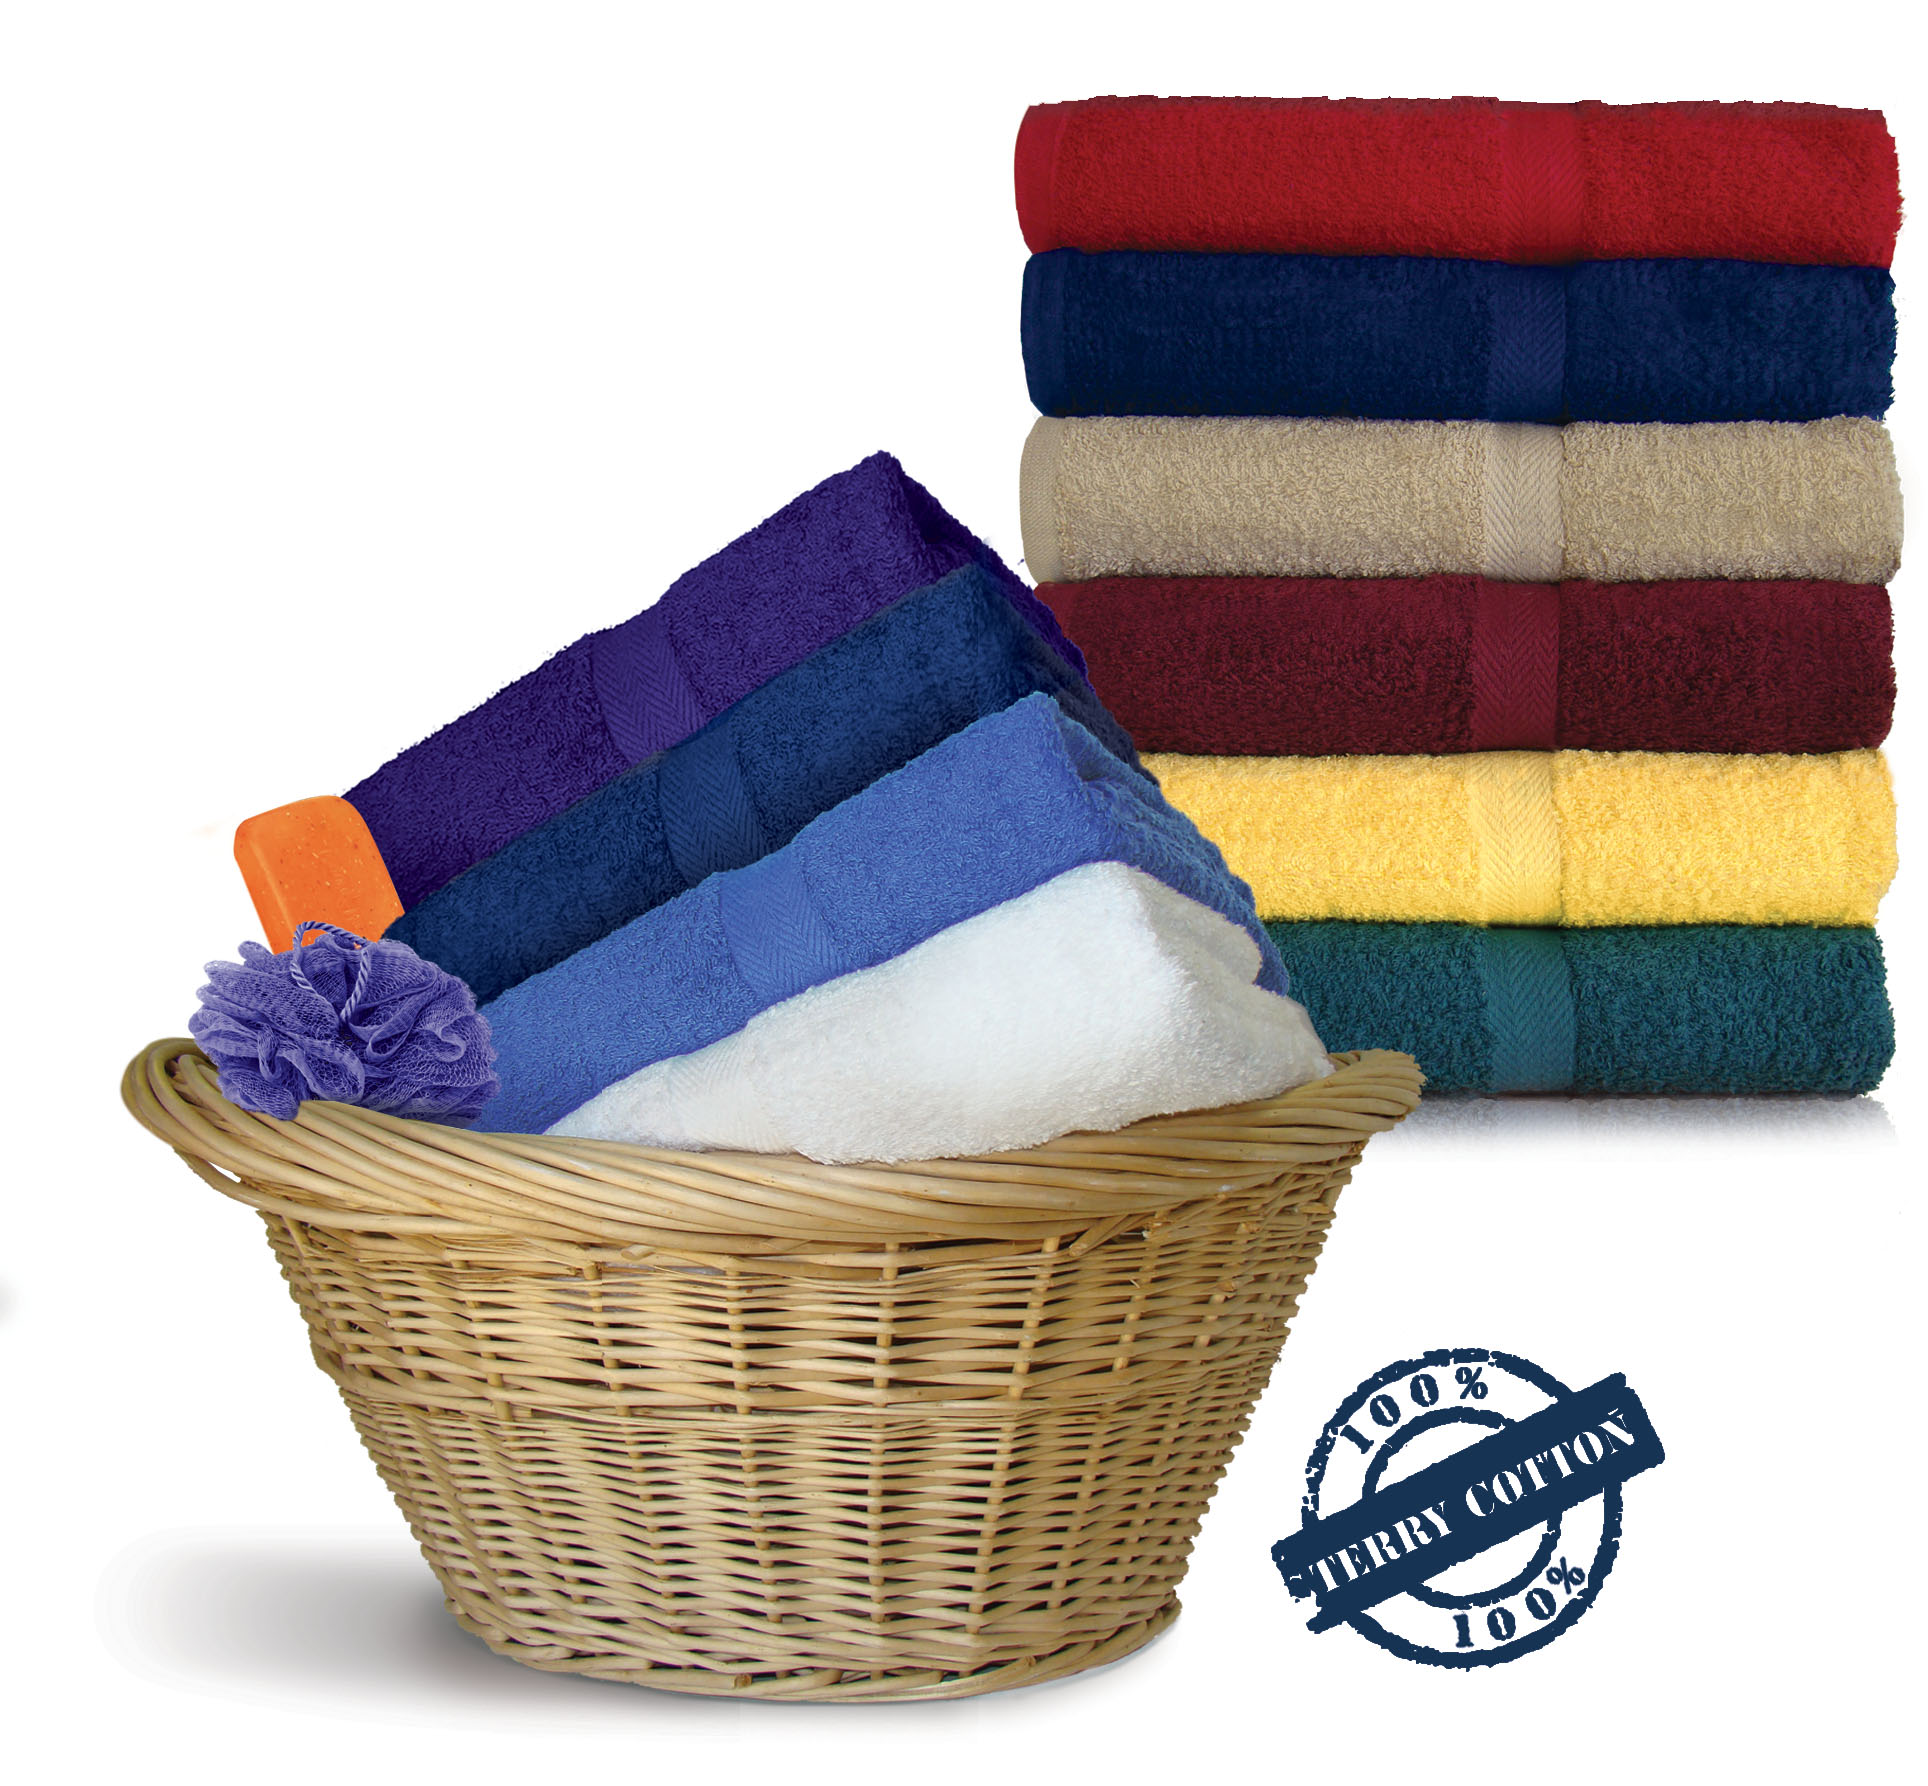 30x52 Shuttleless Loom Bath Towels by Royal Comfort, 14.0 Lbs per dz, Combed Cotton.(Assorted Colors) 24 per case.